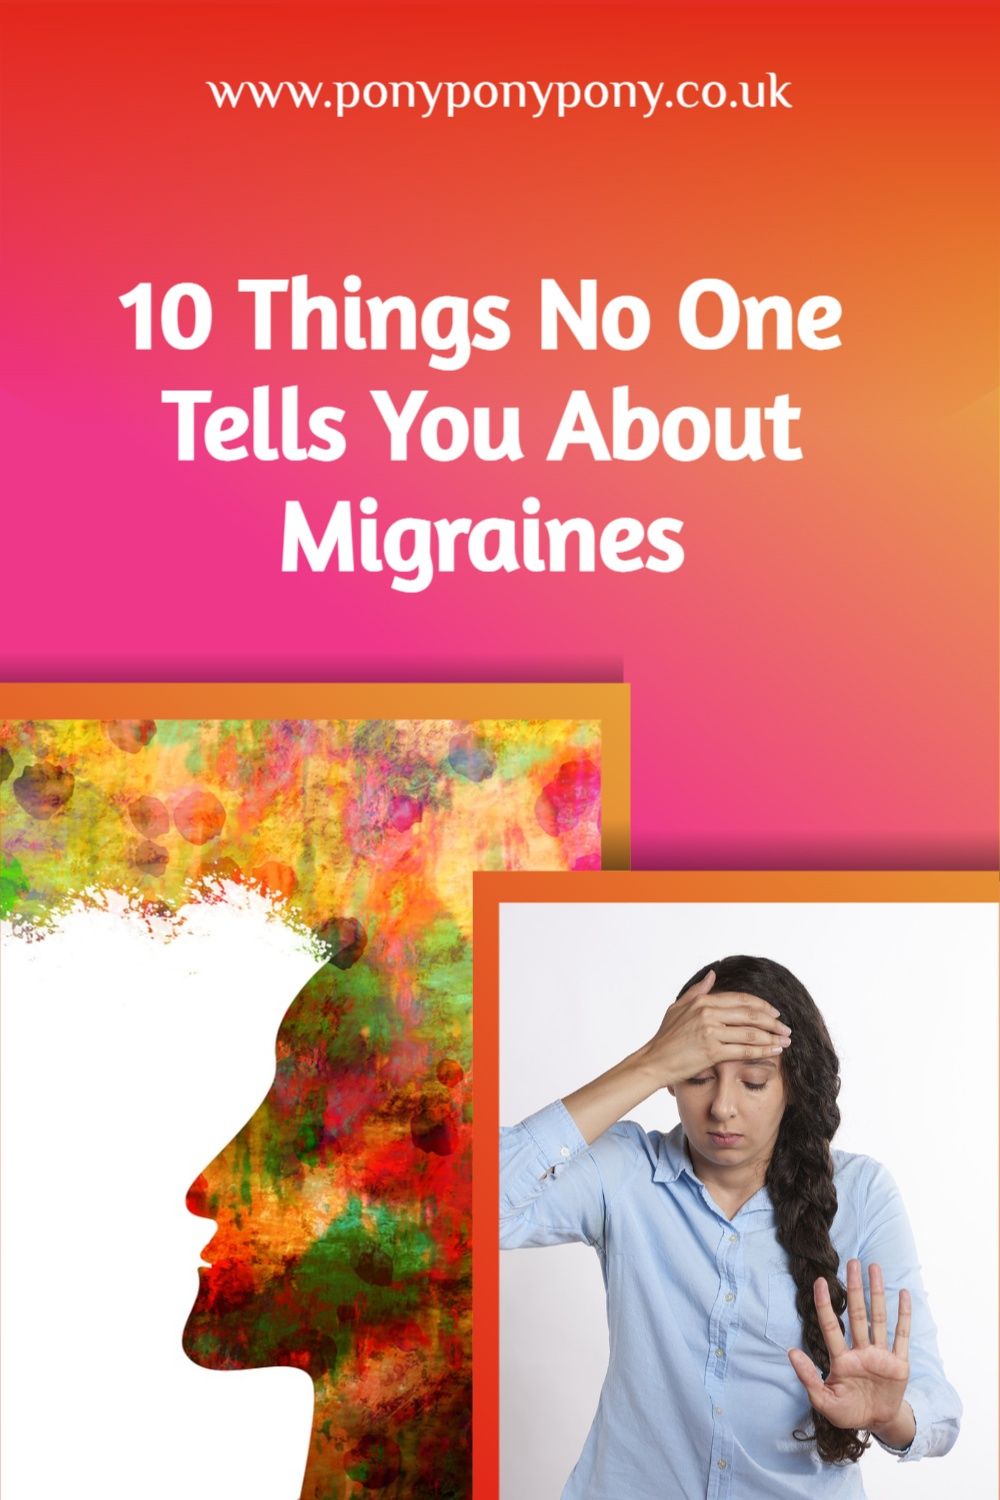 10-Things-No-One-Tells-You-About-Migraines 3